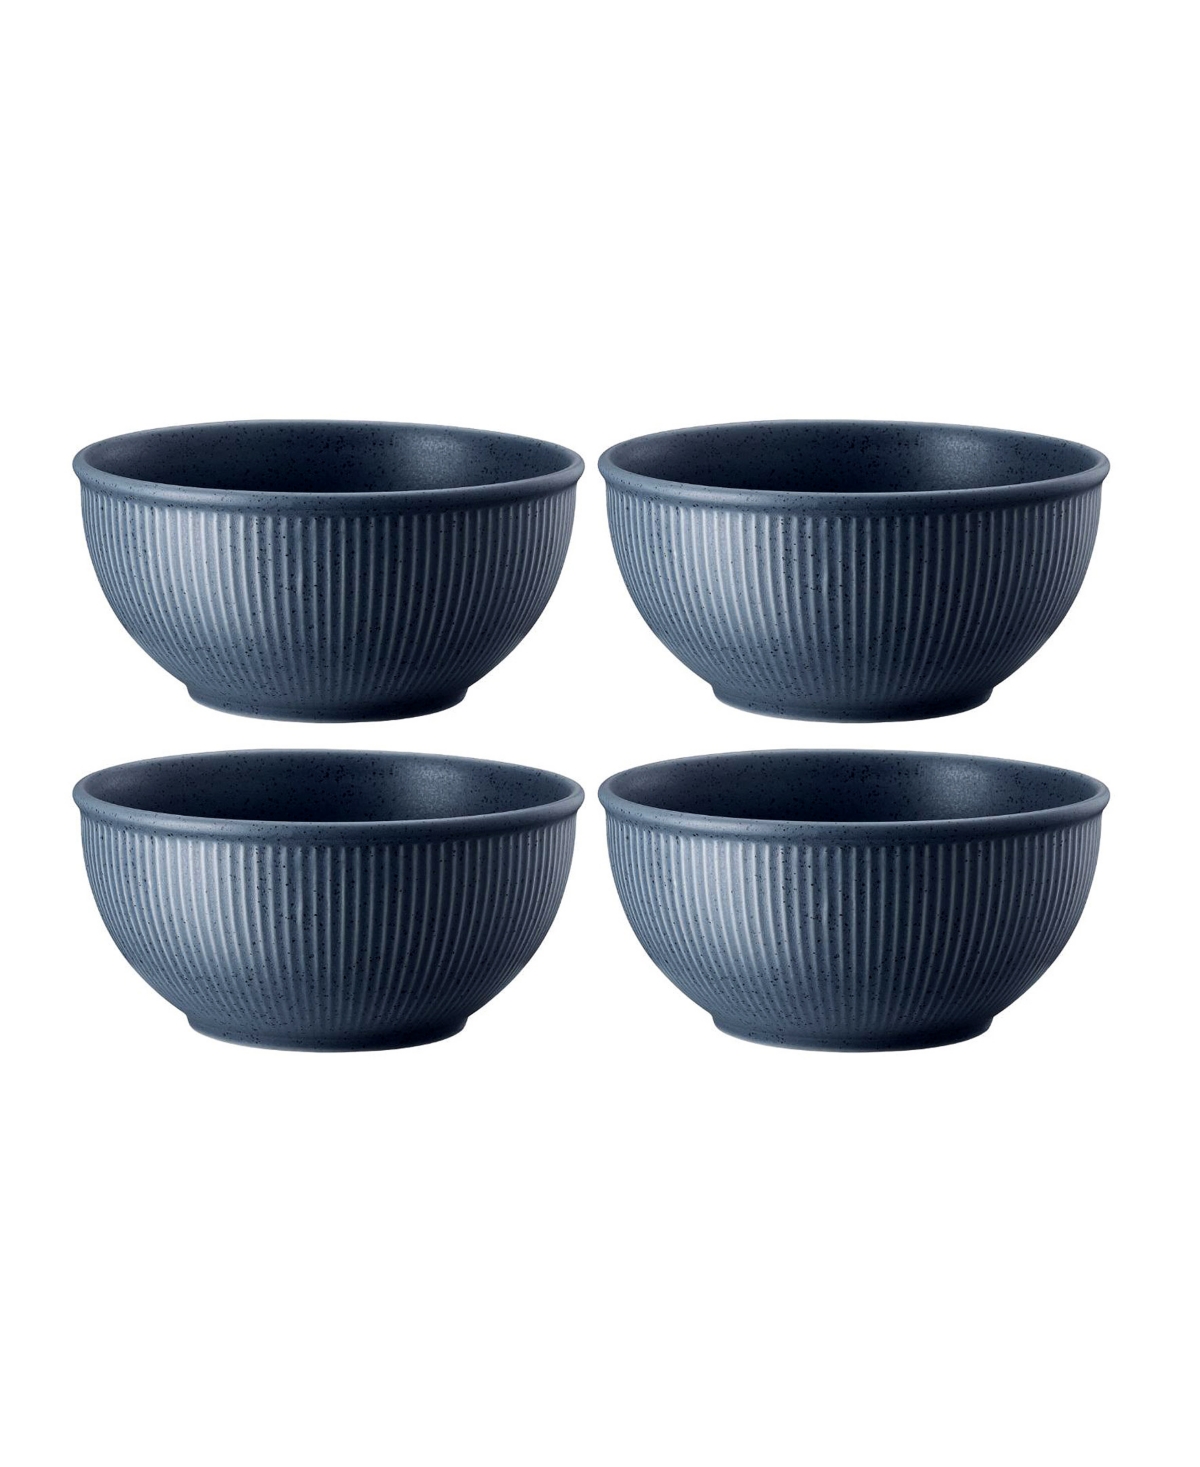 Clay Set of 4 Cereal Bowls, Service for 4 - Sky Blue